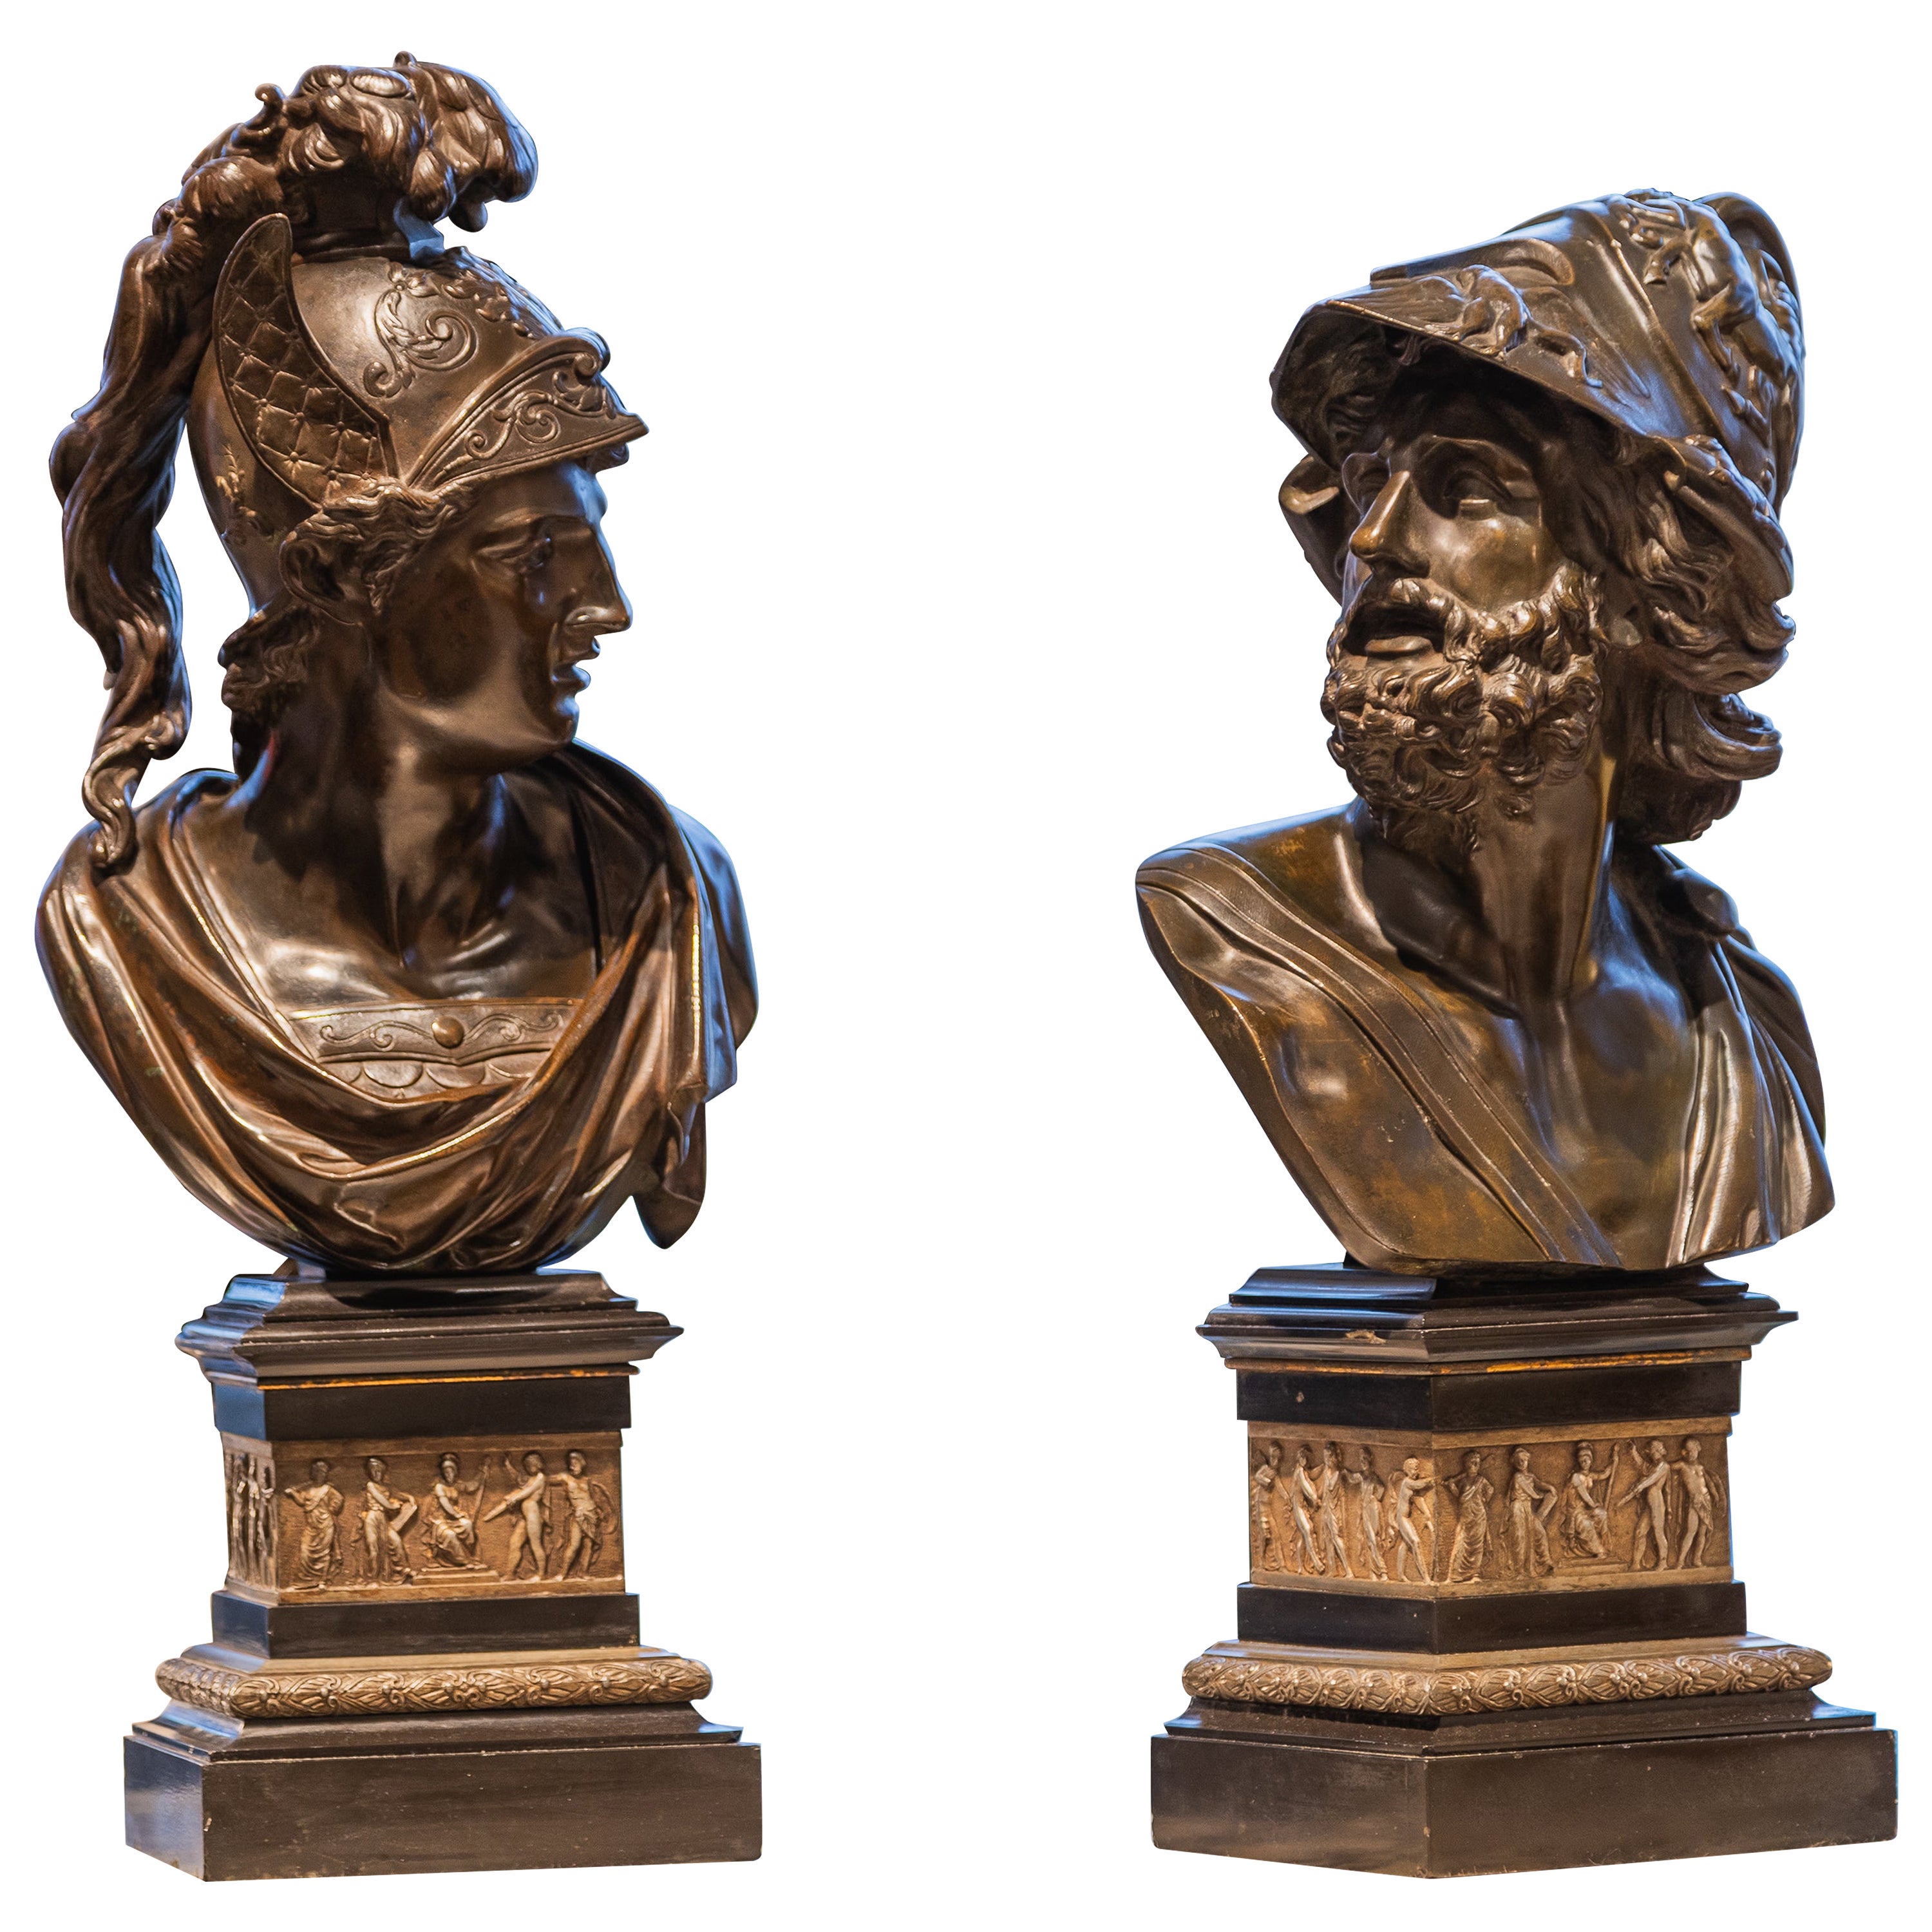 A fine pair of 19th c Classical bronzes by Henry Bonnard Bronze Co 1889